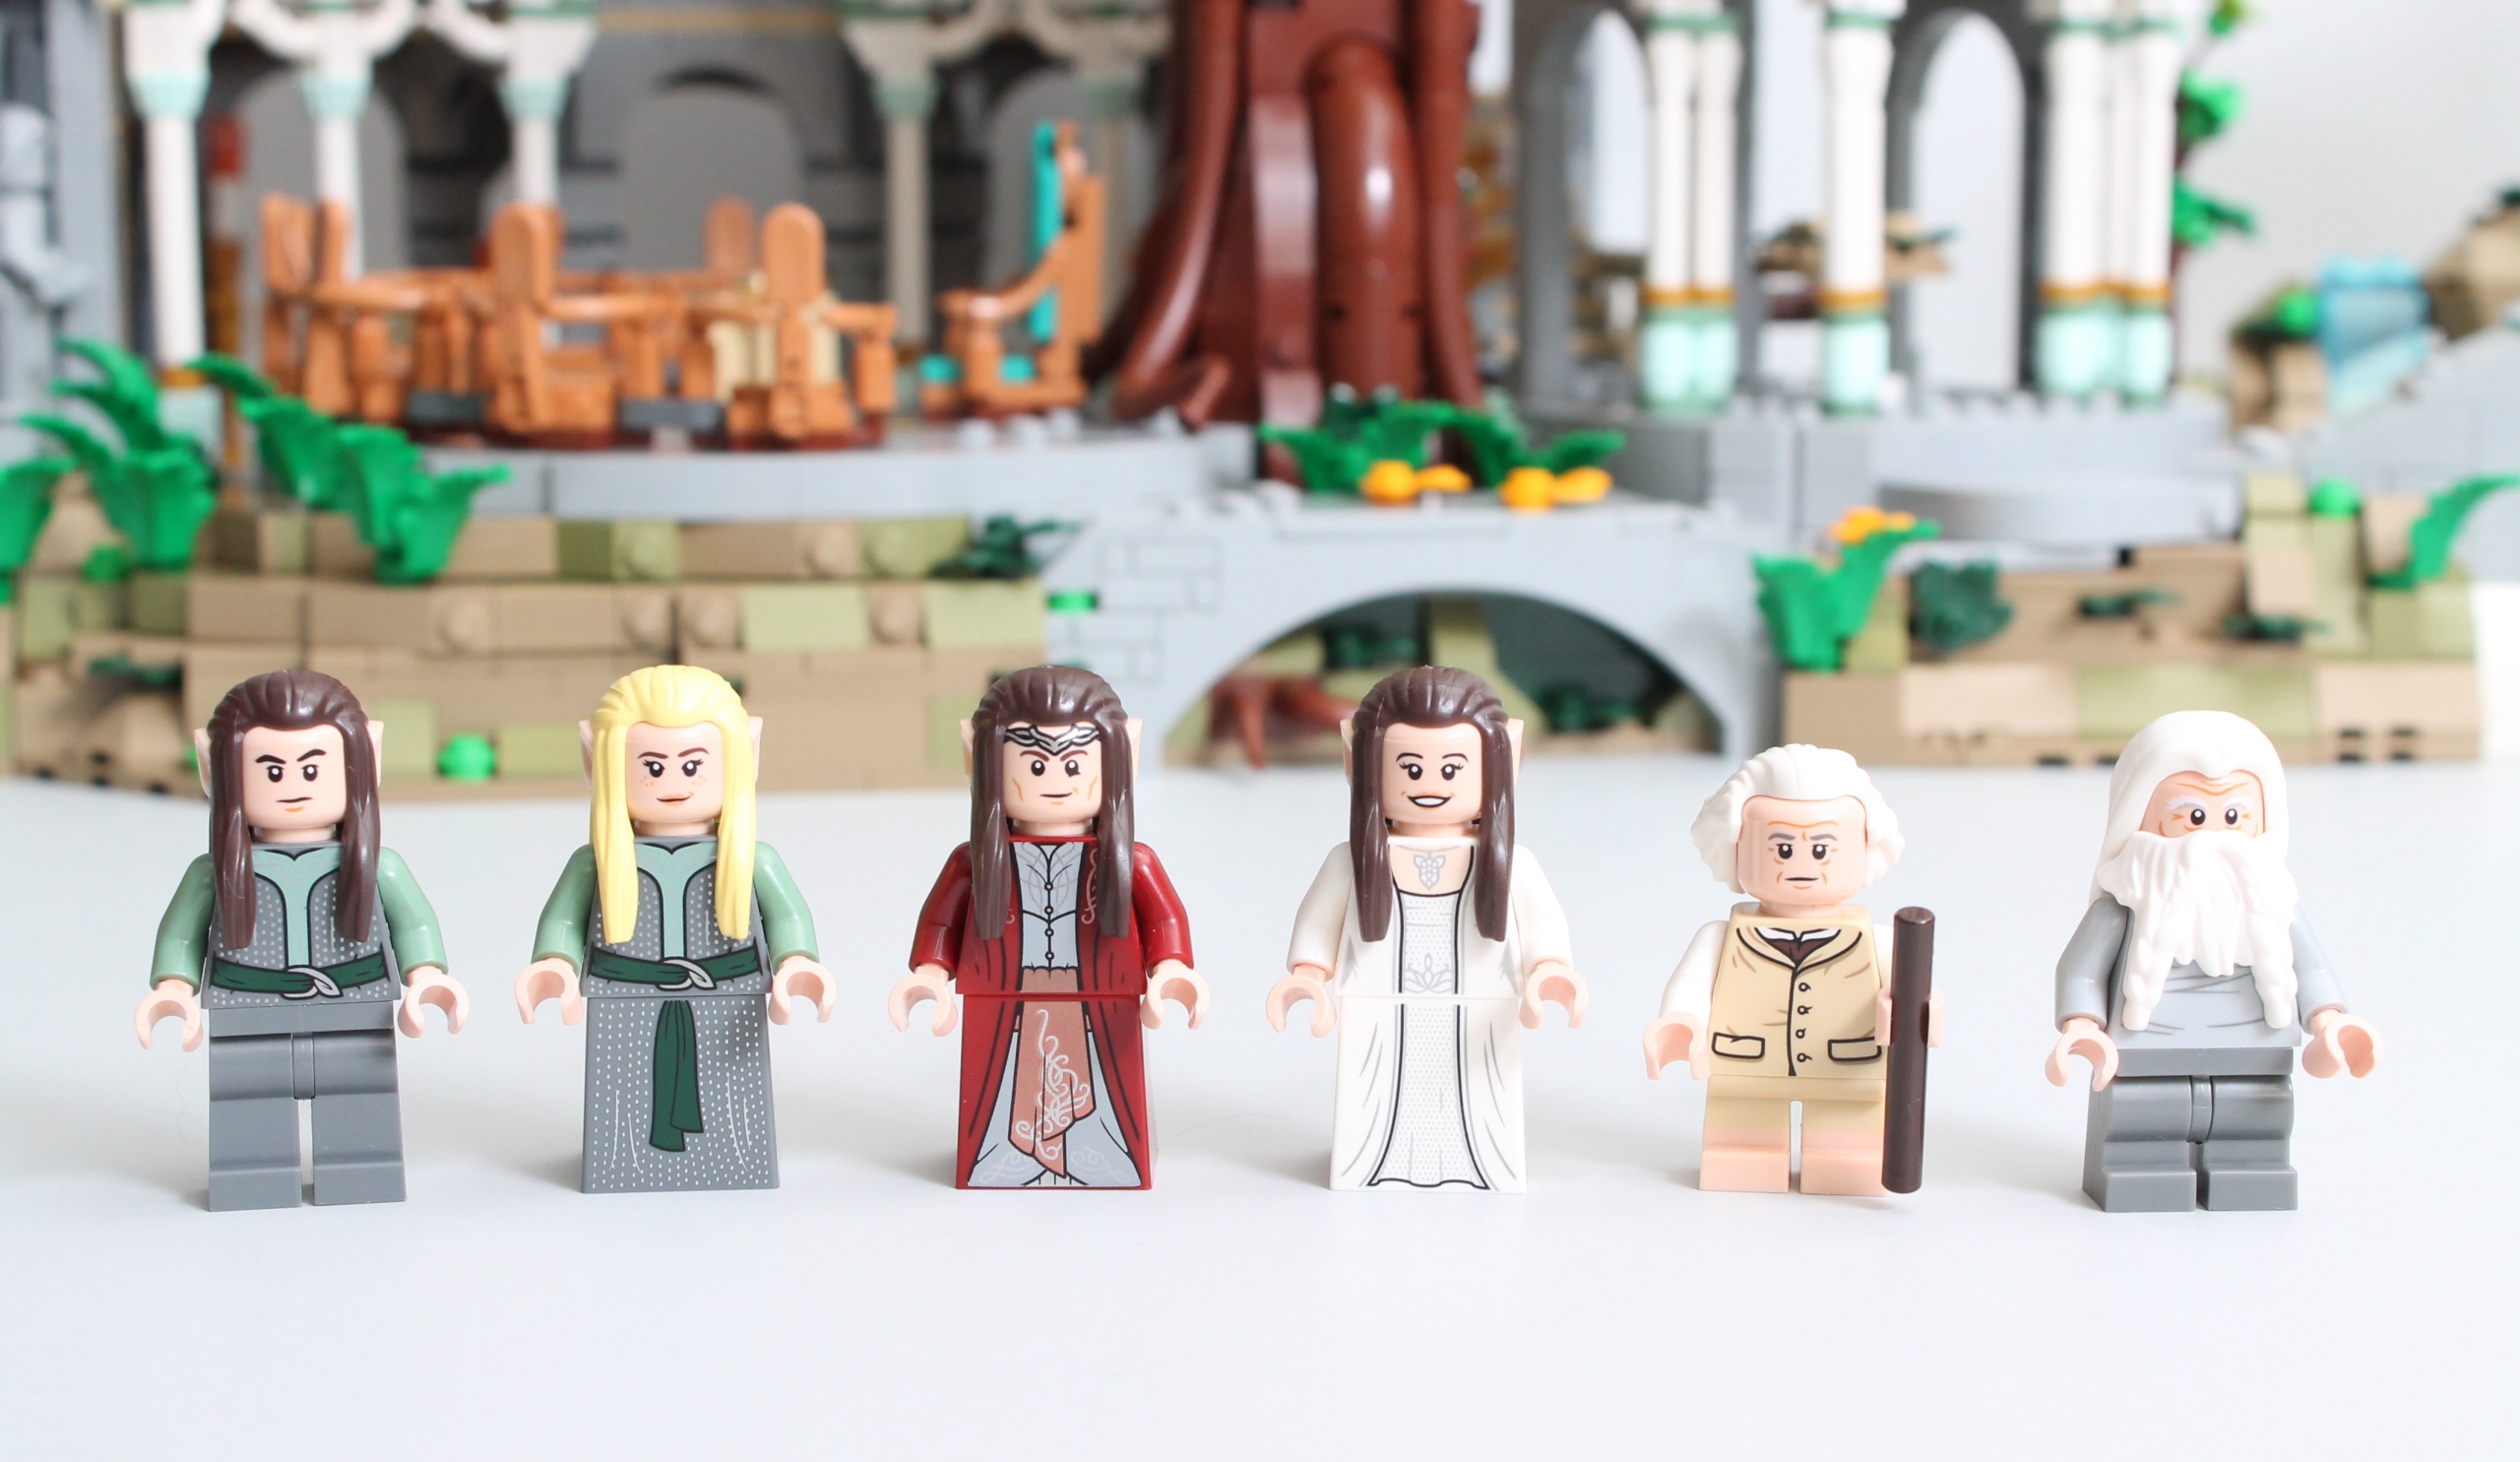 THE LORD OF THE RINGS: RIVENDELL™ 10316, Lord of the Rings™